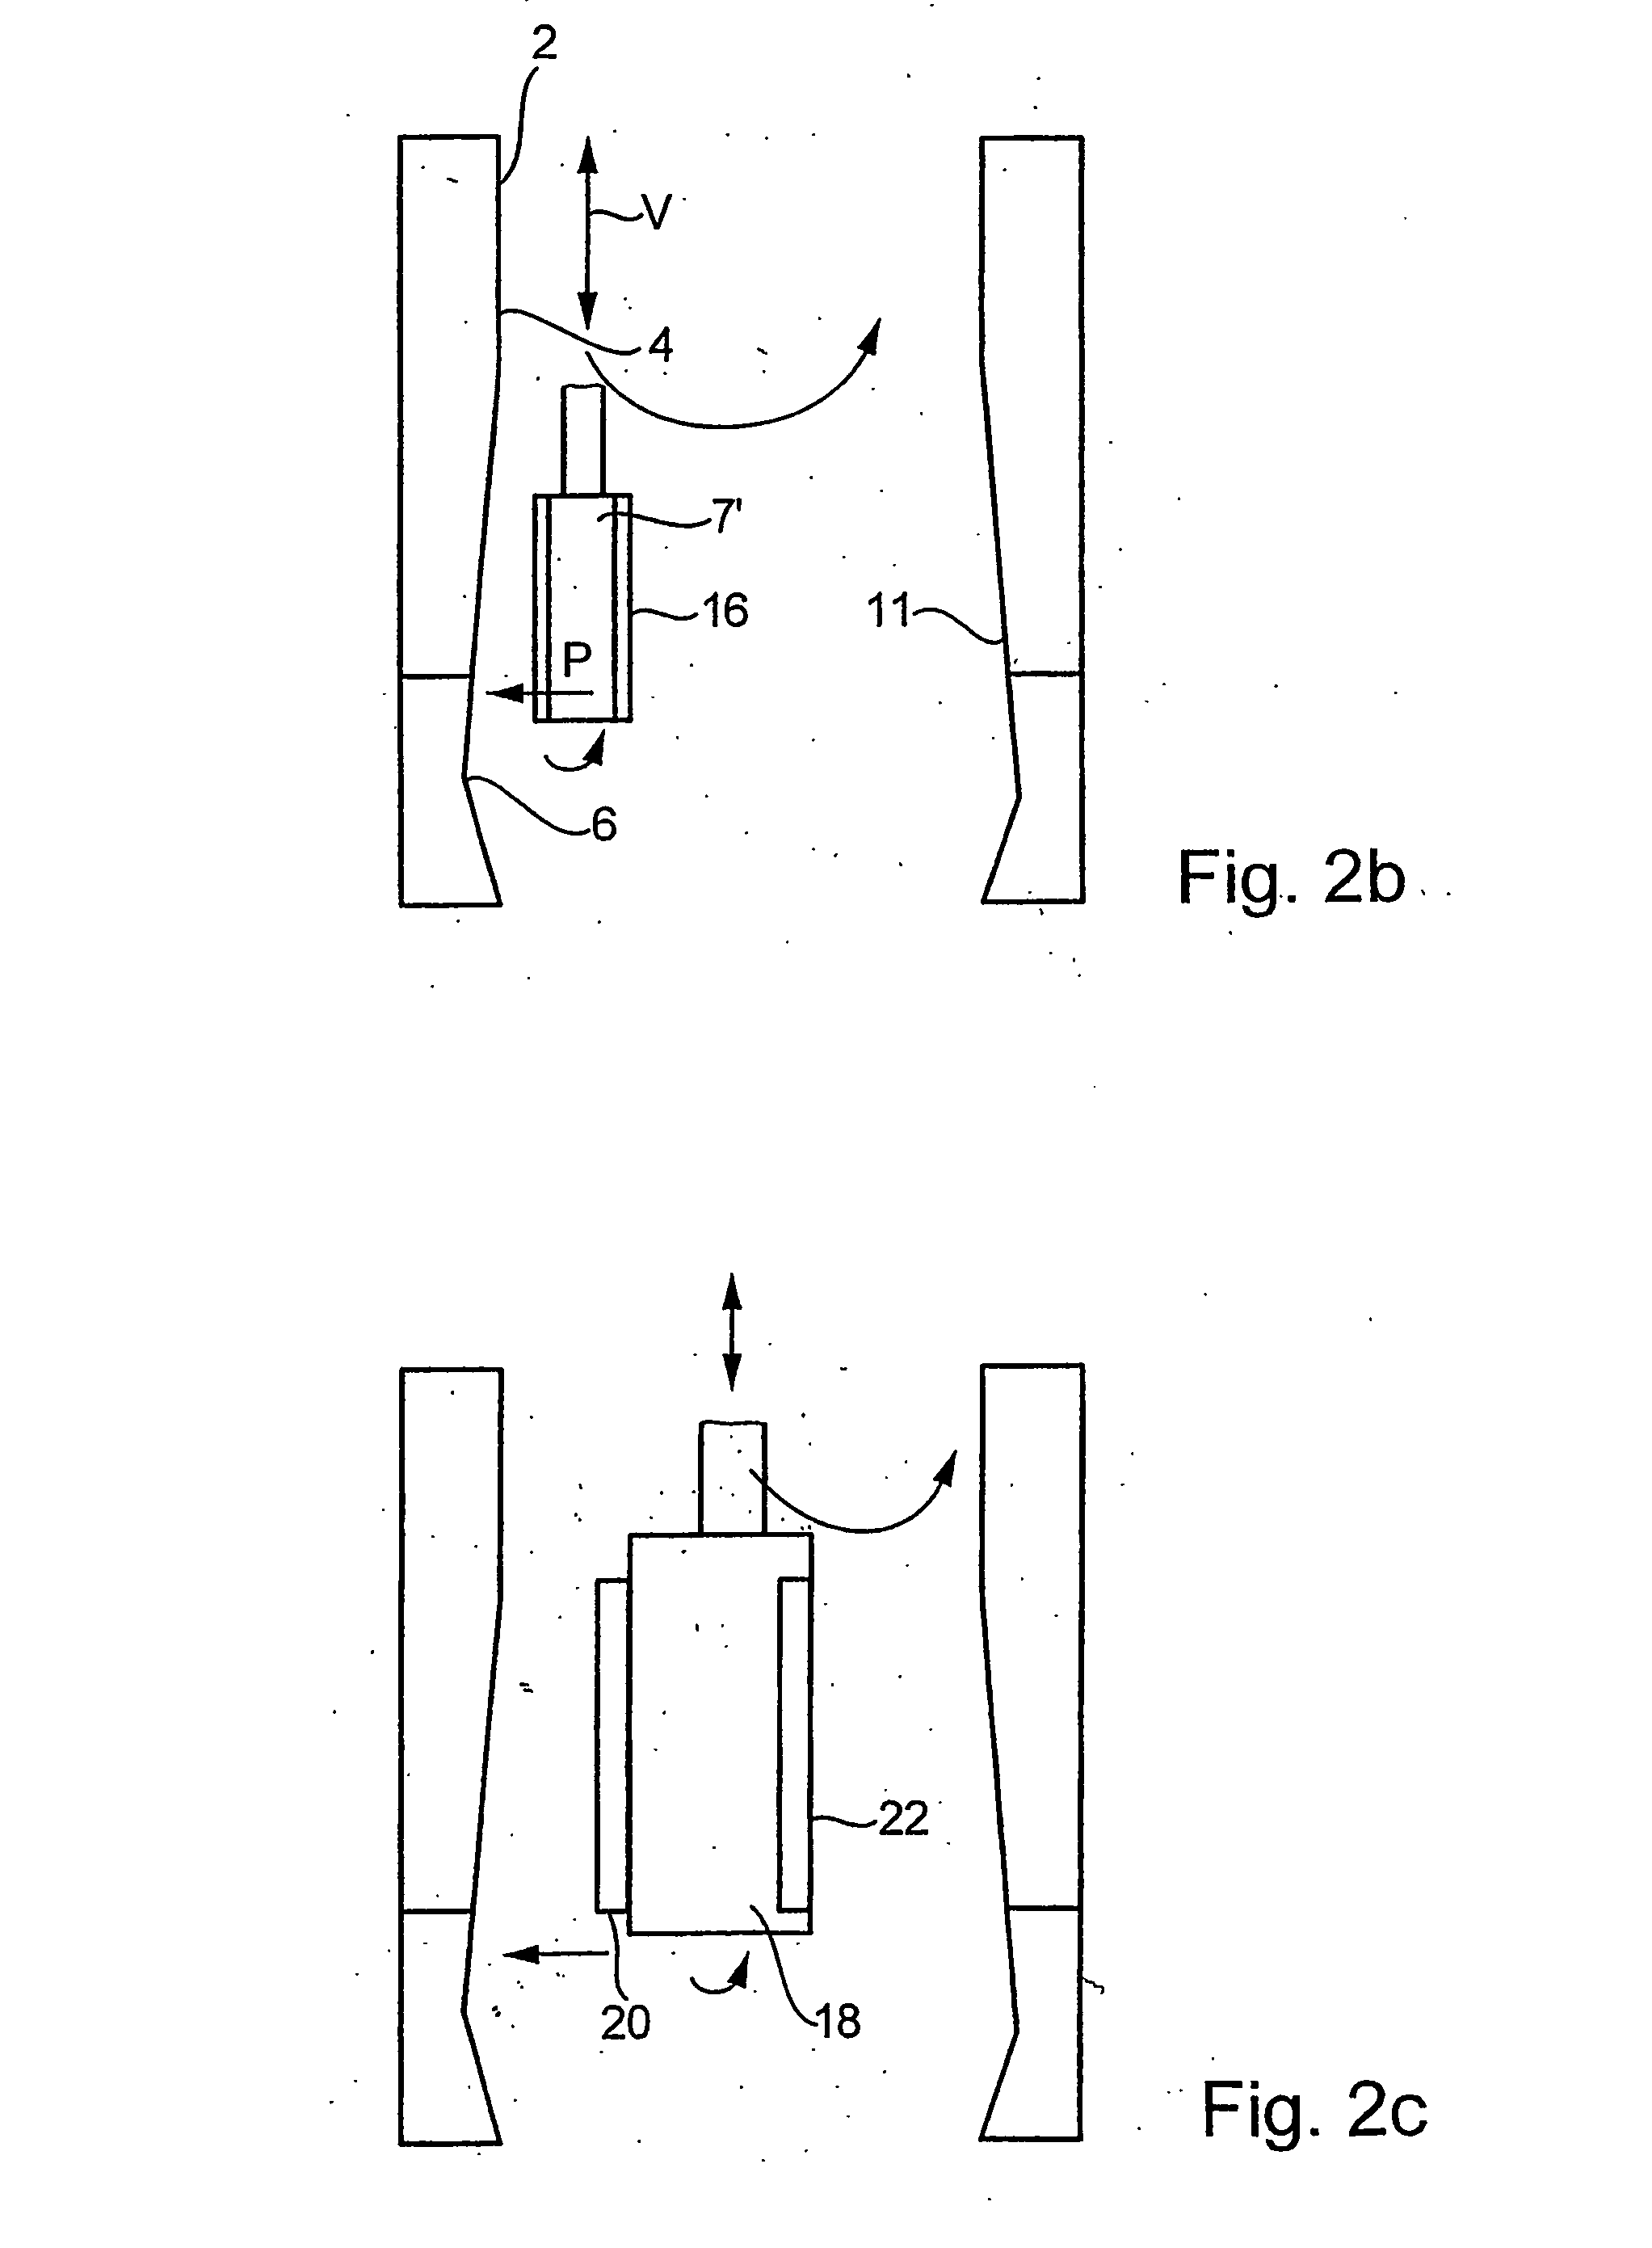 Method for finely processing a cylindrical inner surface